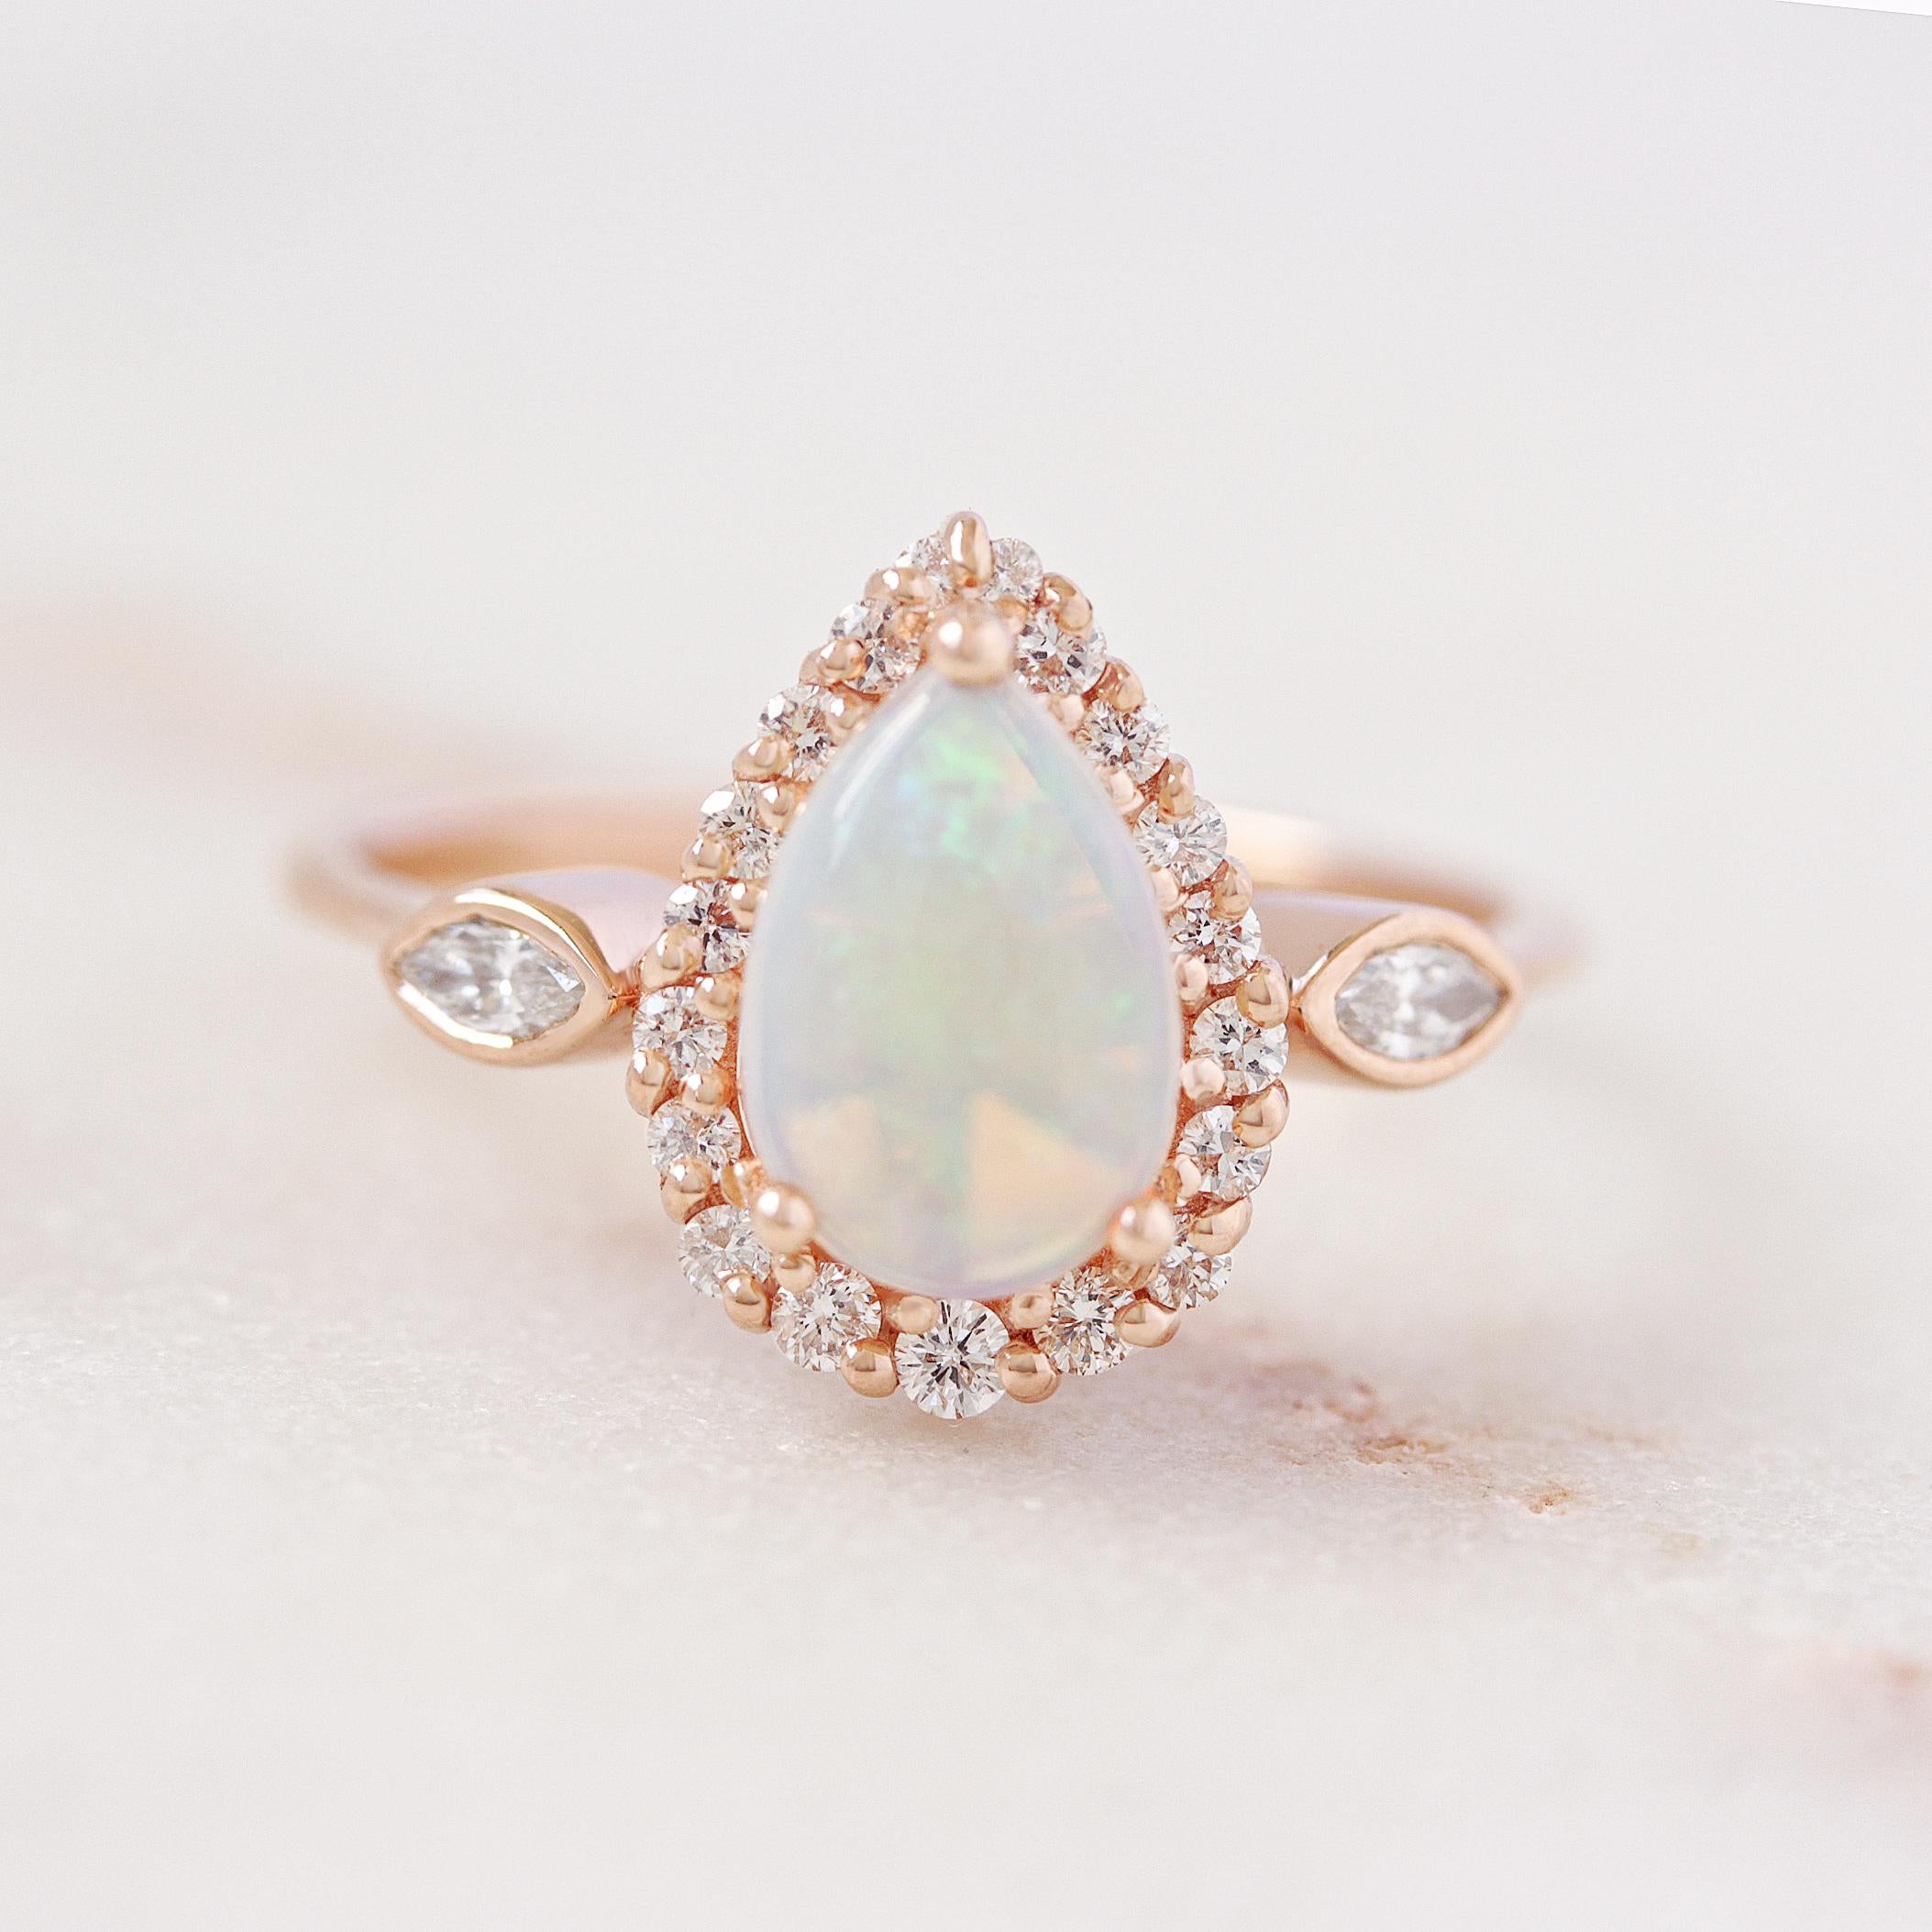 Pear Cut Pear Opal and Diamond Halo Unique Victorian Vintage Inspired Engagement Ring Zoe